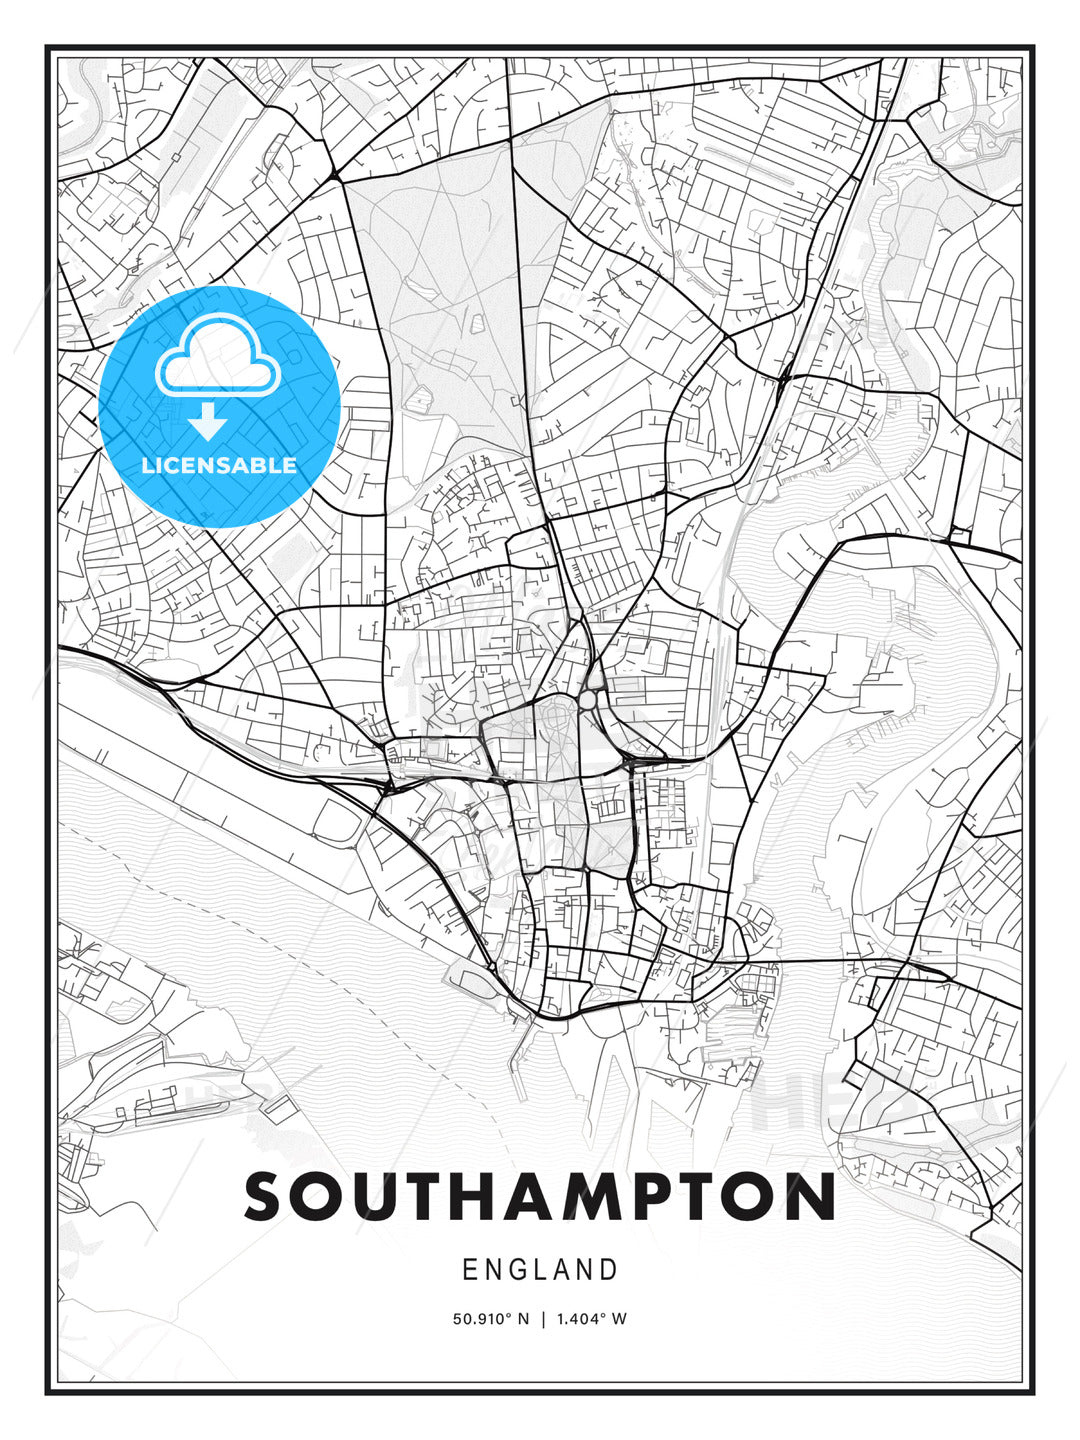 Southampton, England, Modern Print Template in Various Formats - HEBSTREITS Sketches